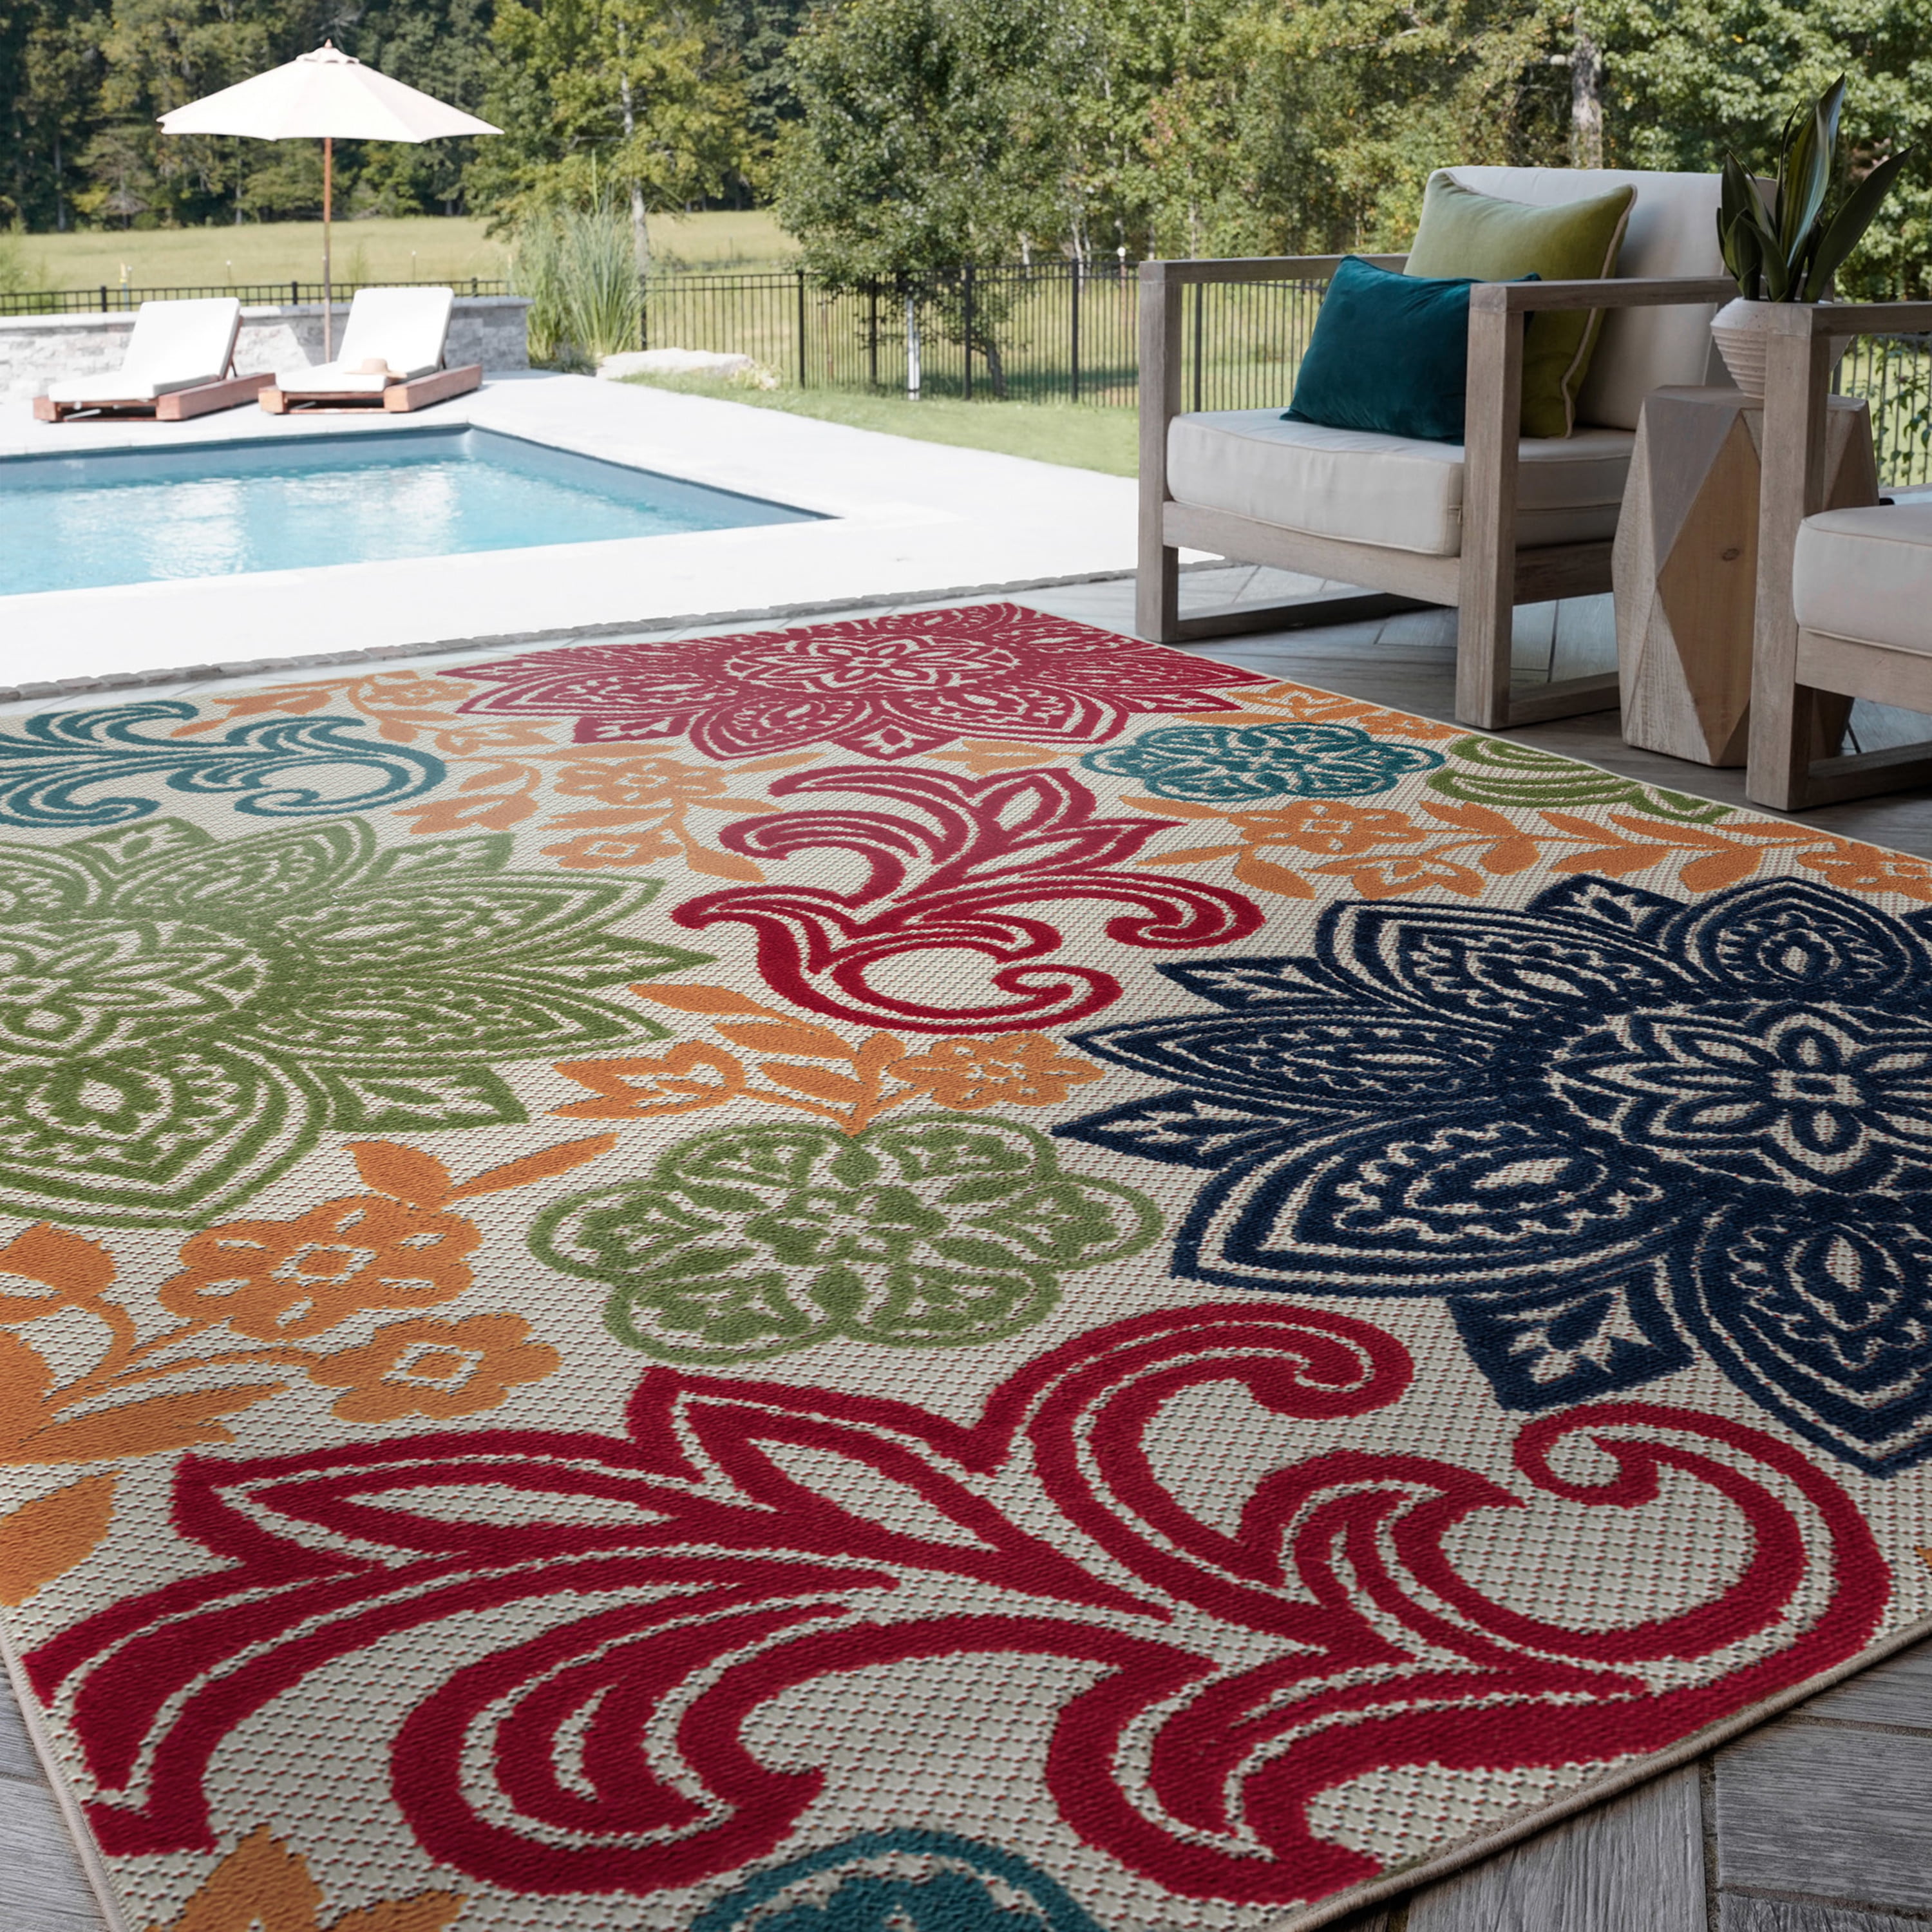 9x12 Water Resistant, Large Indoor Outdoor Rugs for Patios, Front Door Entry,  Entryway, Deck, Porch, Balcony, Outside Area Rug for Patio, Multi-Color,  Floral